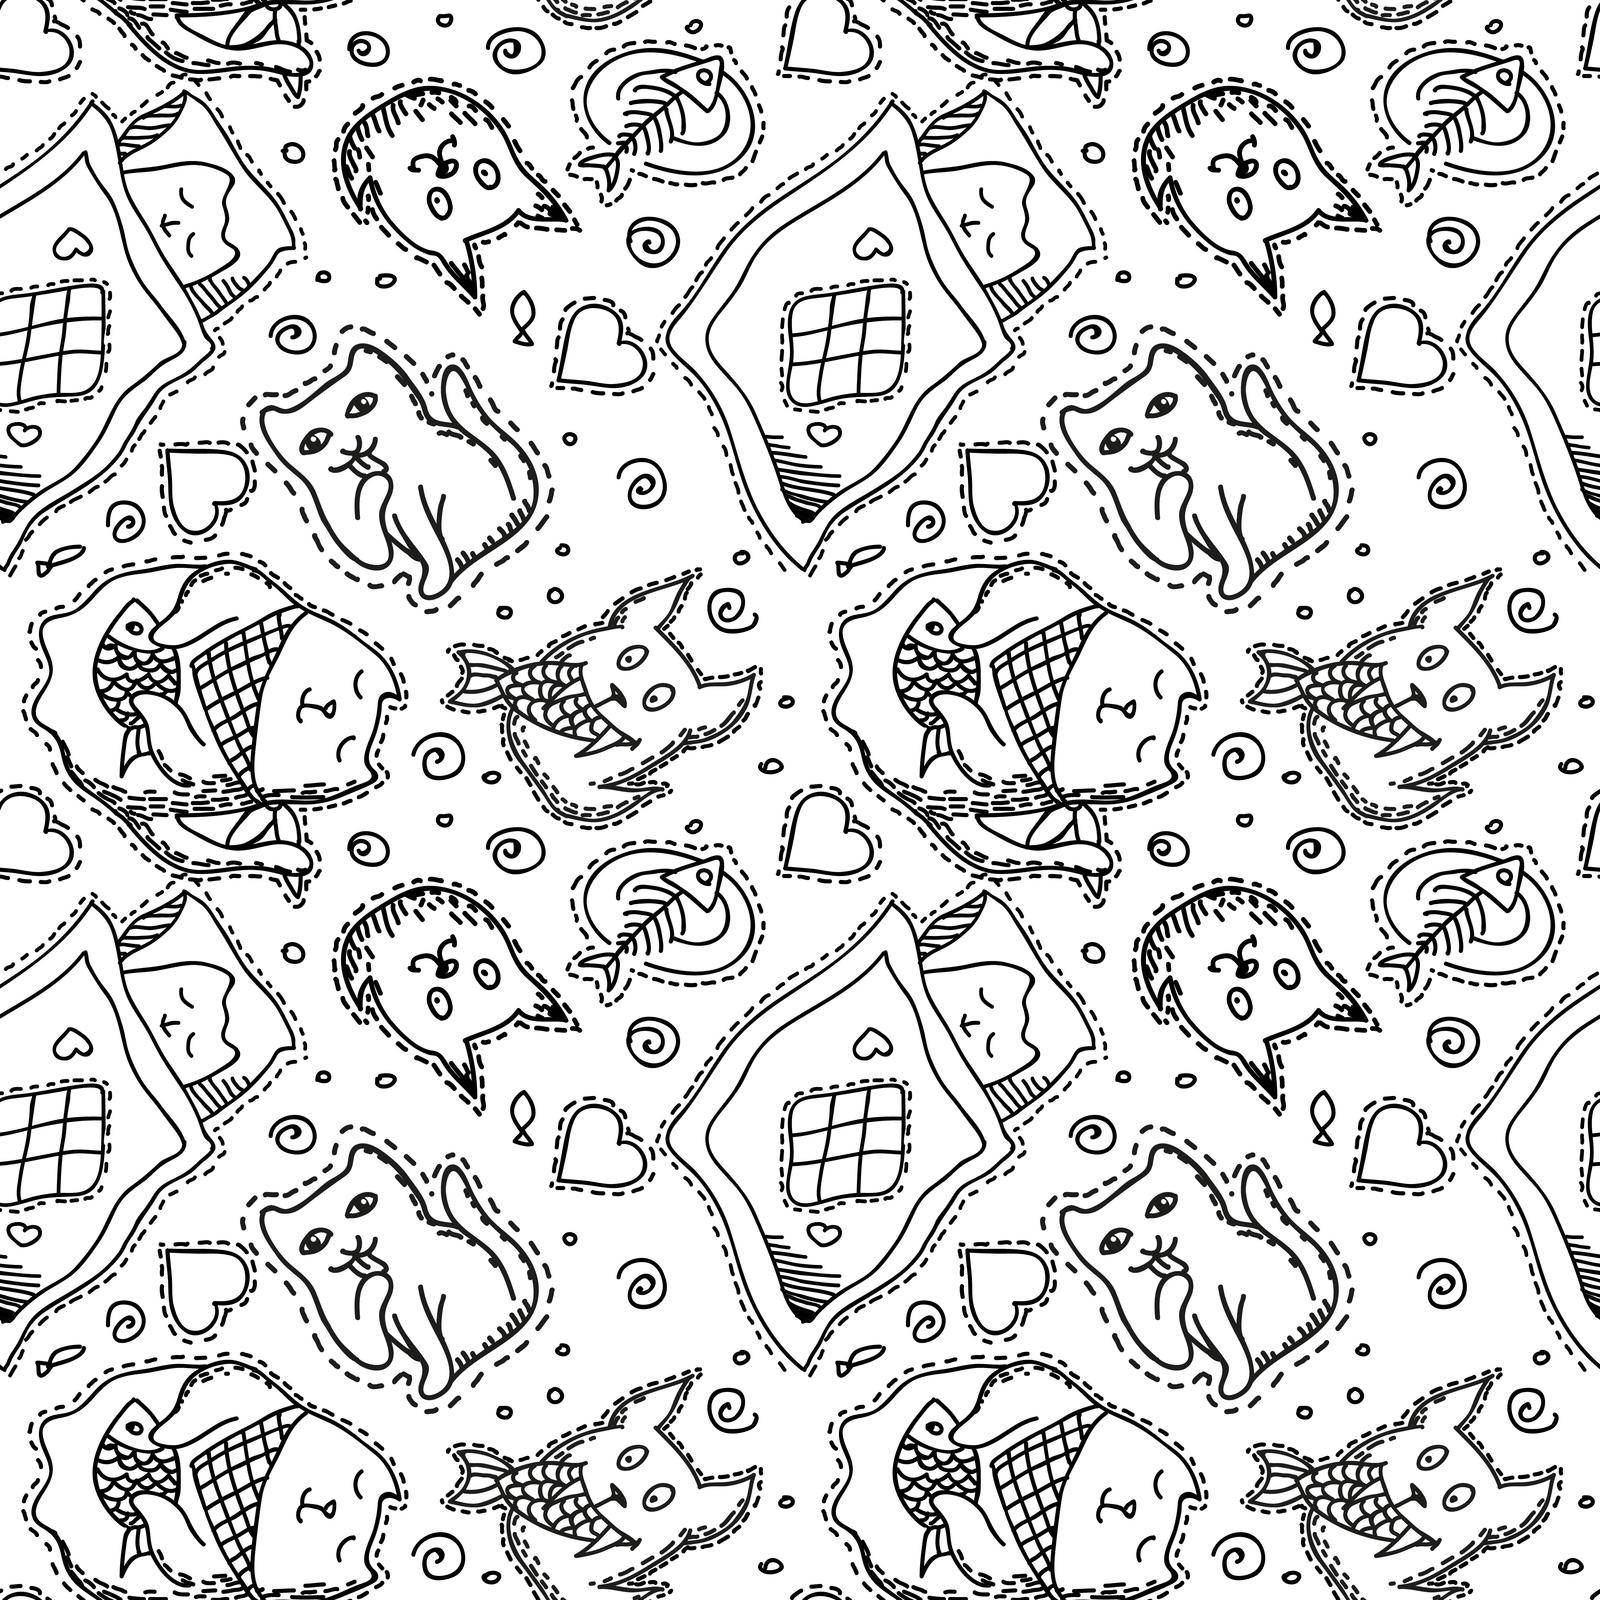 Hand drawn cats seamless vector pattern. Doodle art.